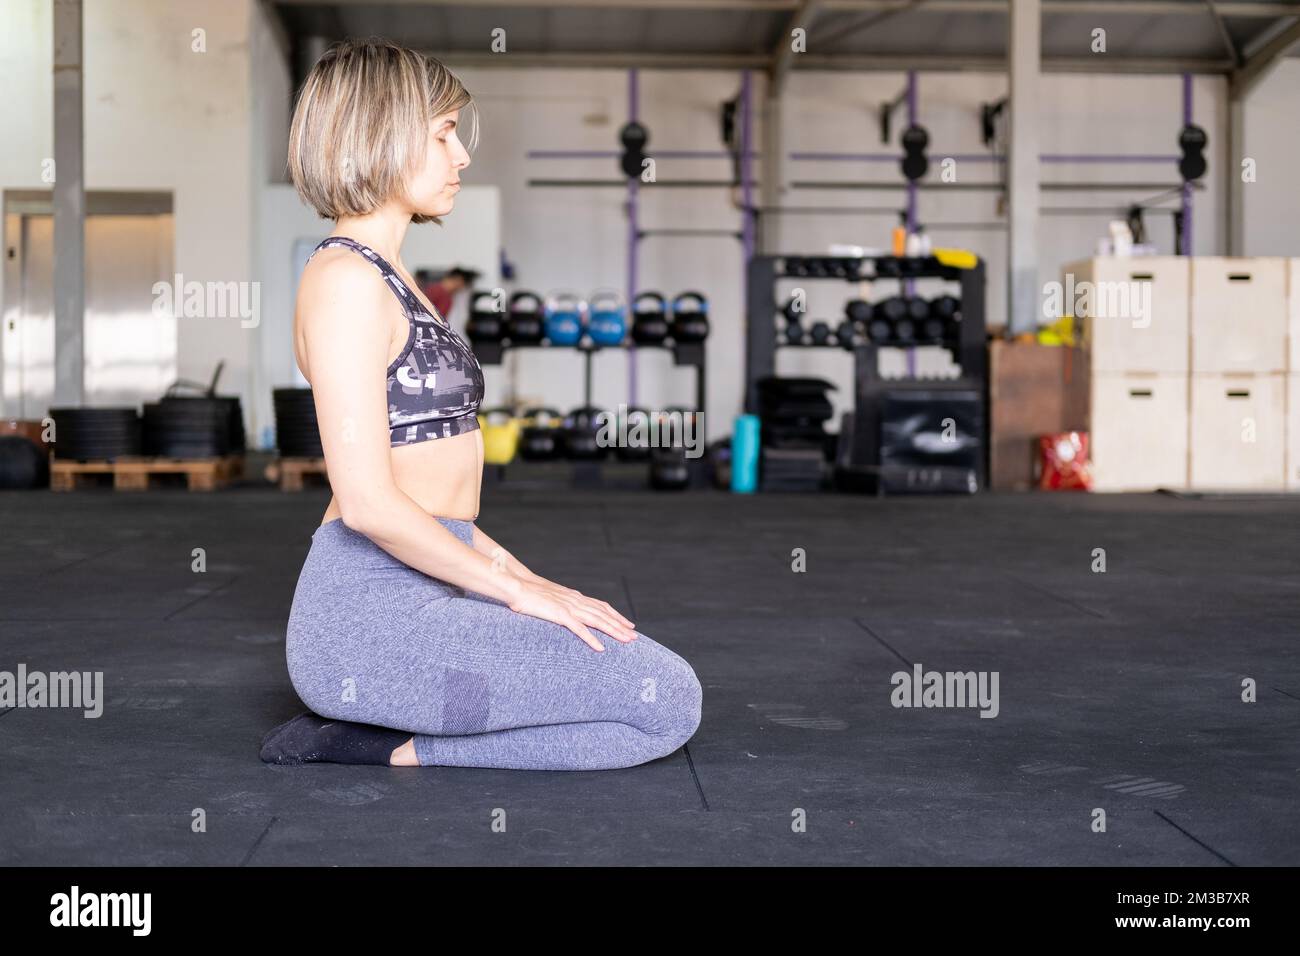 A blond mid adult woman meditating in kneeling or vajrasana pose with eyes closed during her vinyasa flow yoga practice alone and wearing leggings and Stock Photo